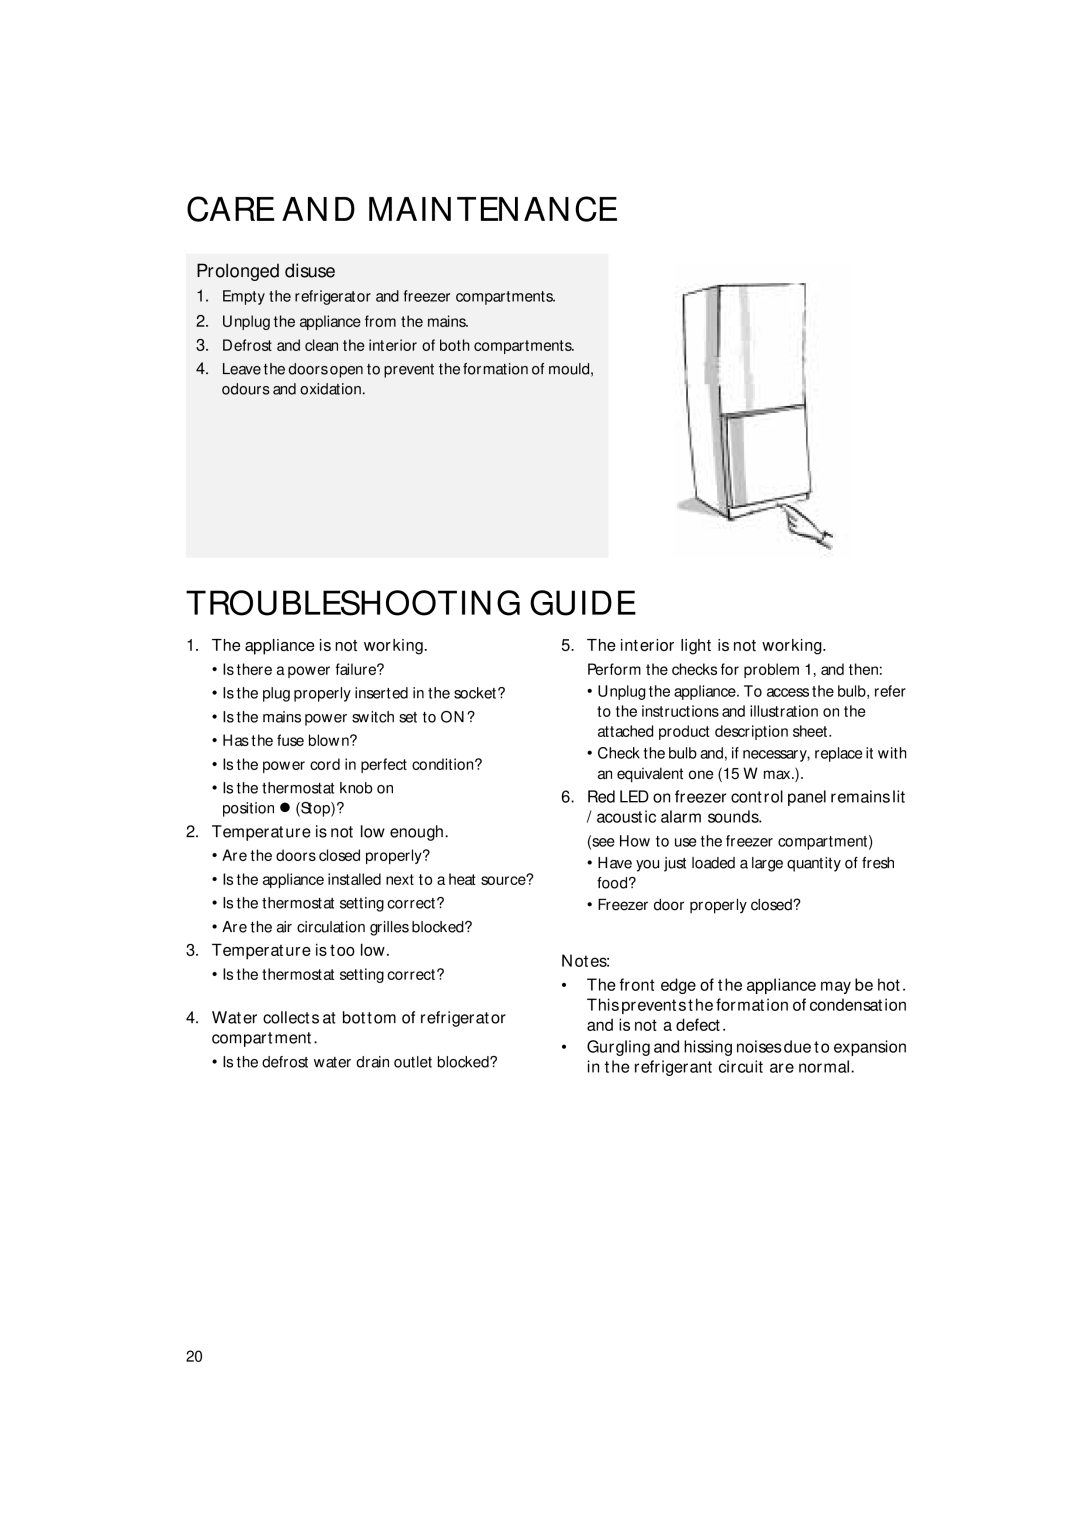 Smeg CR315SE manual Care And Maintenance, Troubleshooting Guide, Prolonged disuse, The appliance is not working 